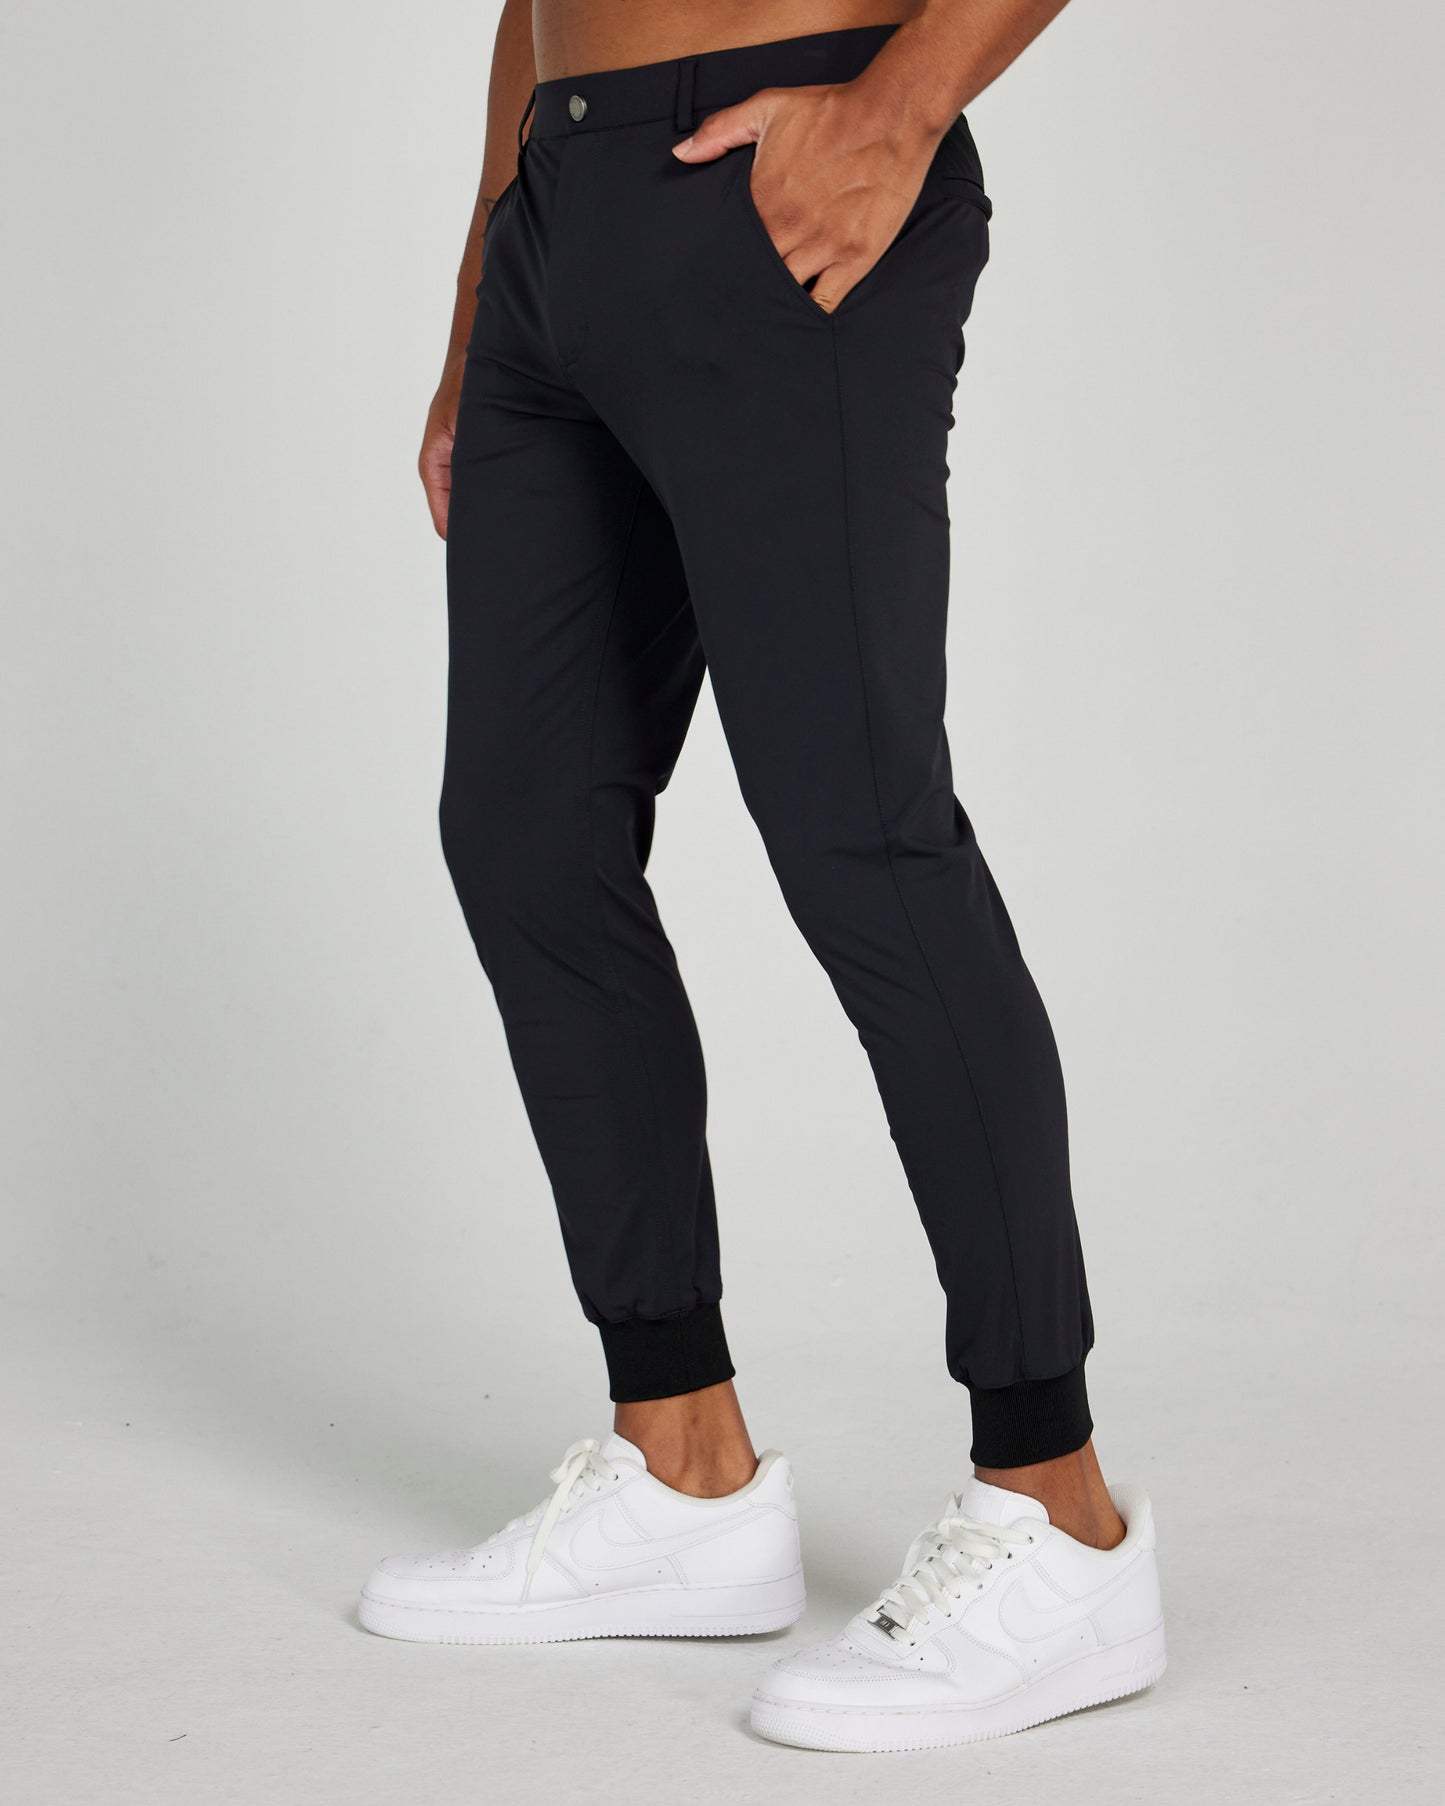 Image of the halliday pull-on jogger in tuxedo